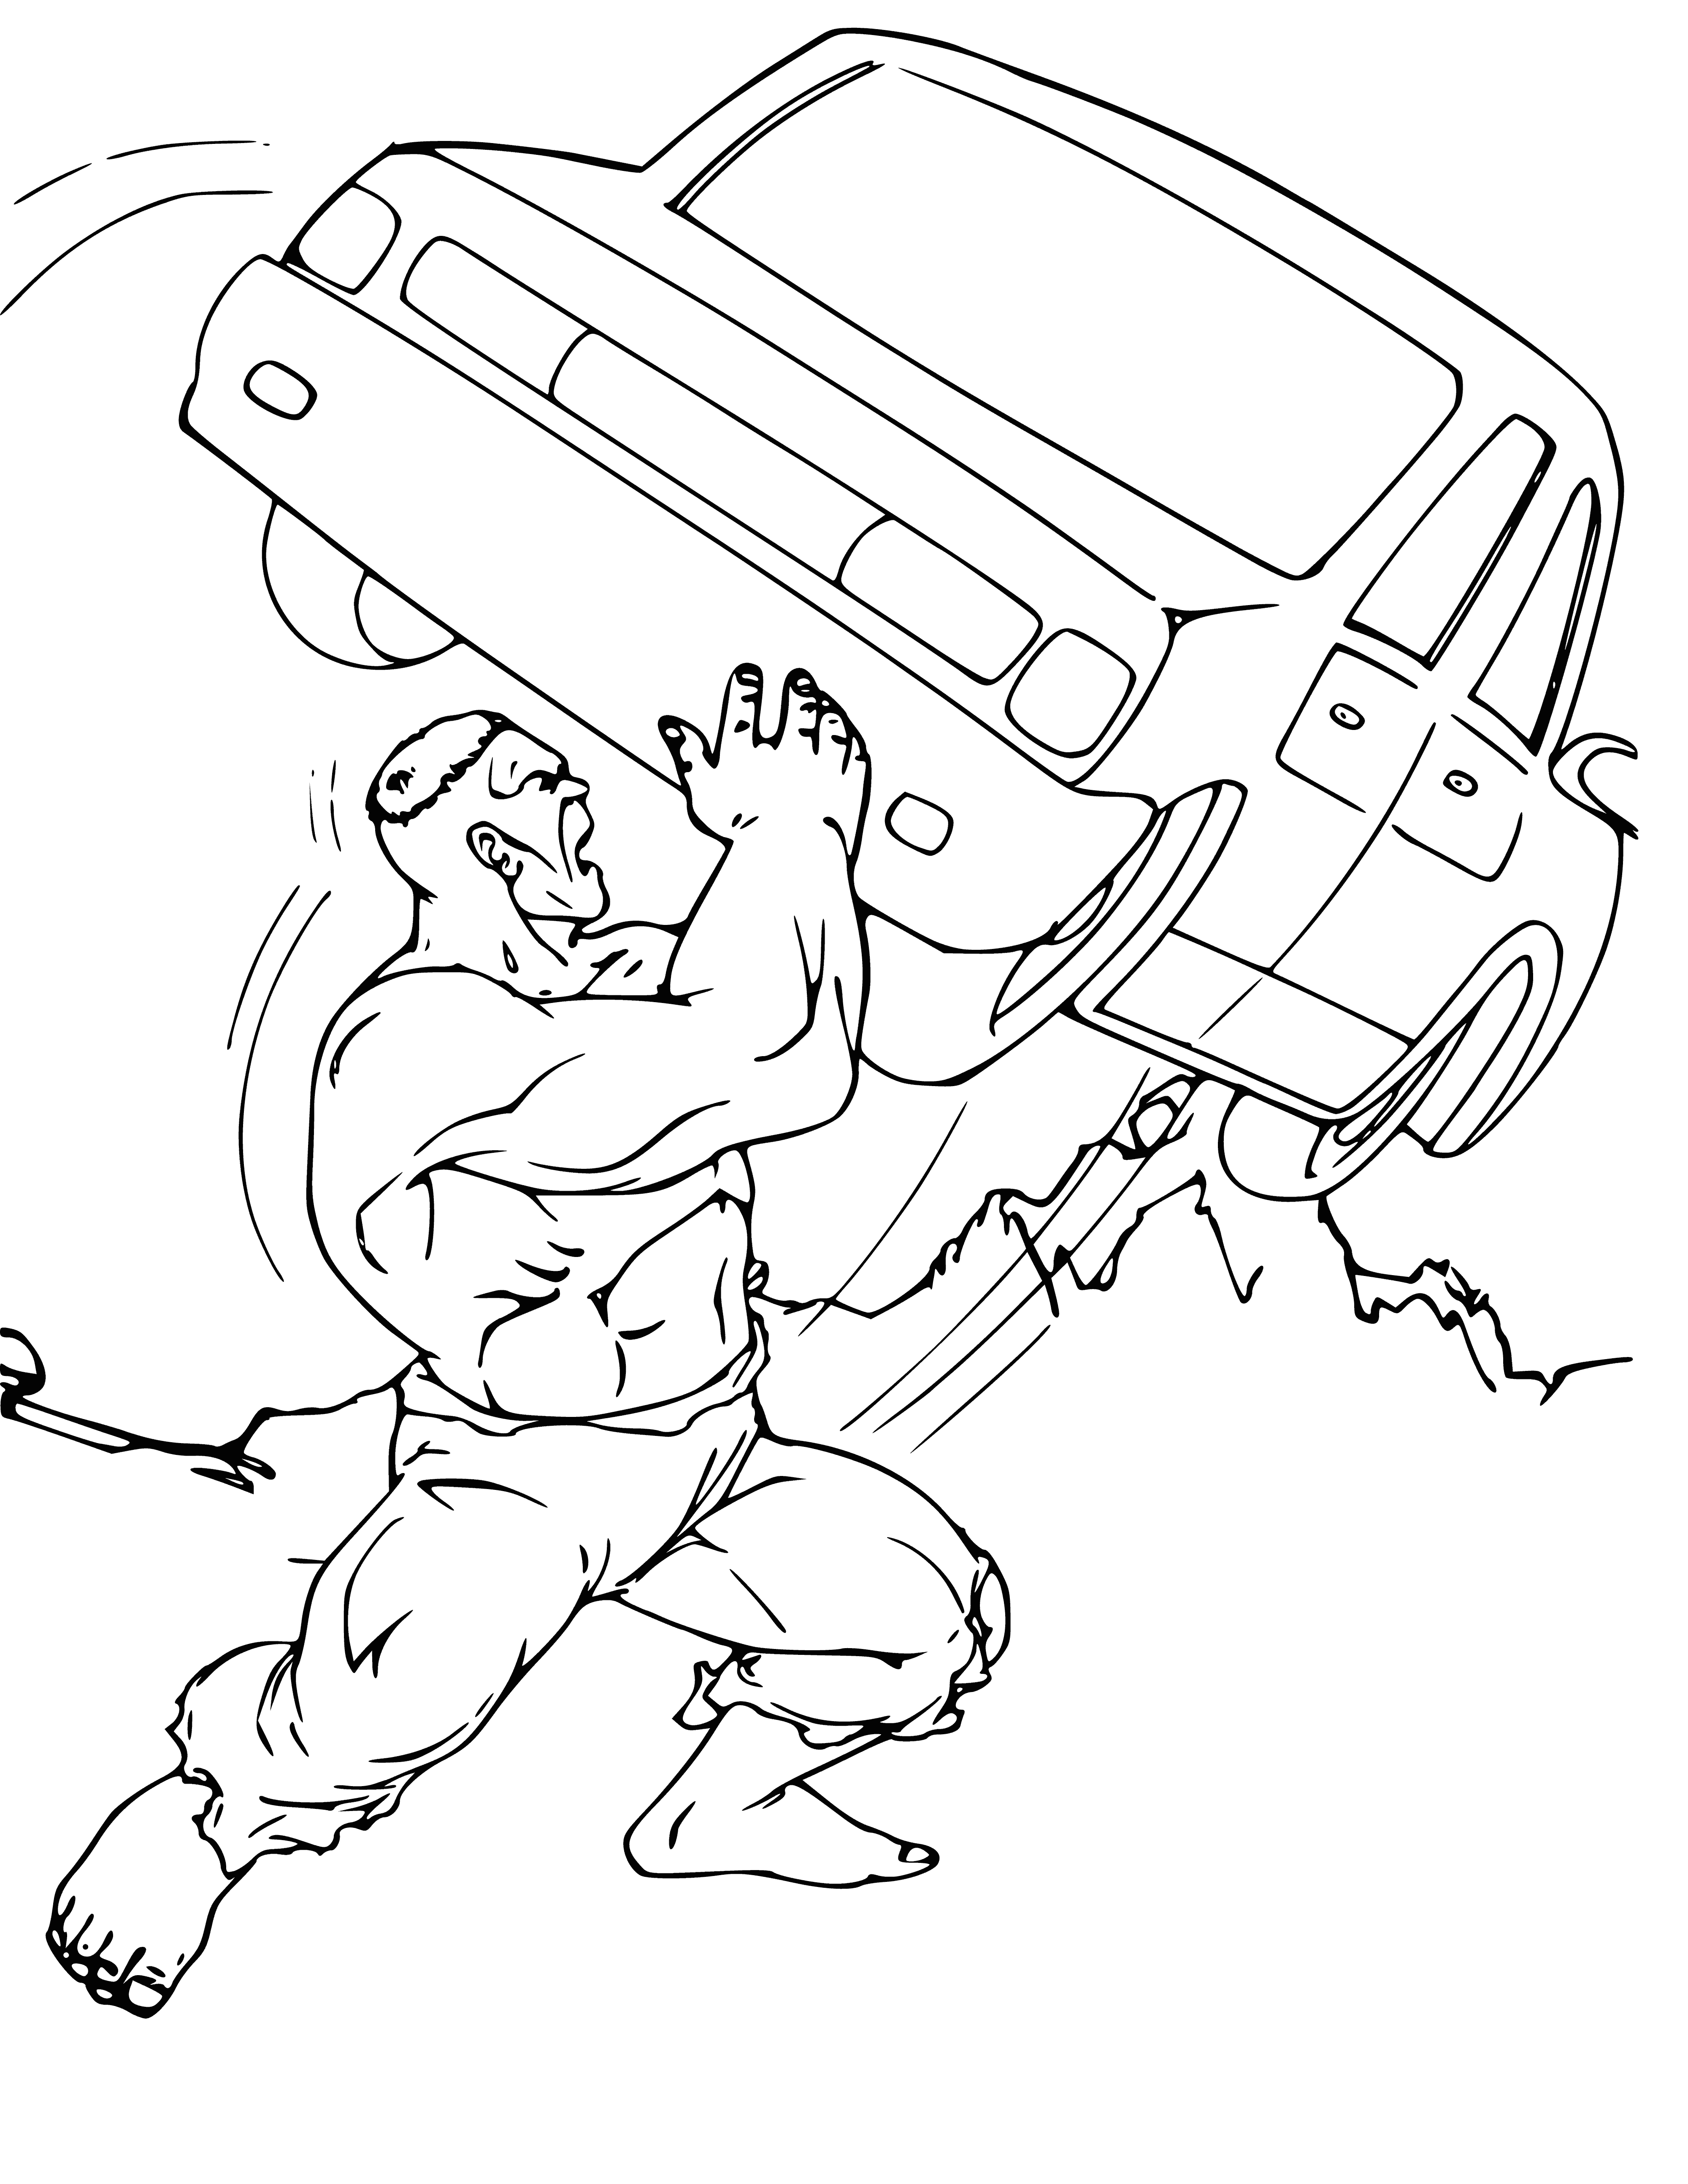 coloring page: The Hulk is a green, muscular creature prone to destructive rampages and feared by civilians and superheroes alike.